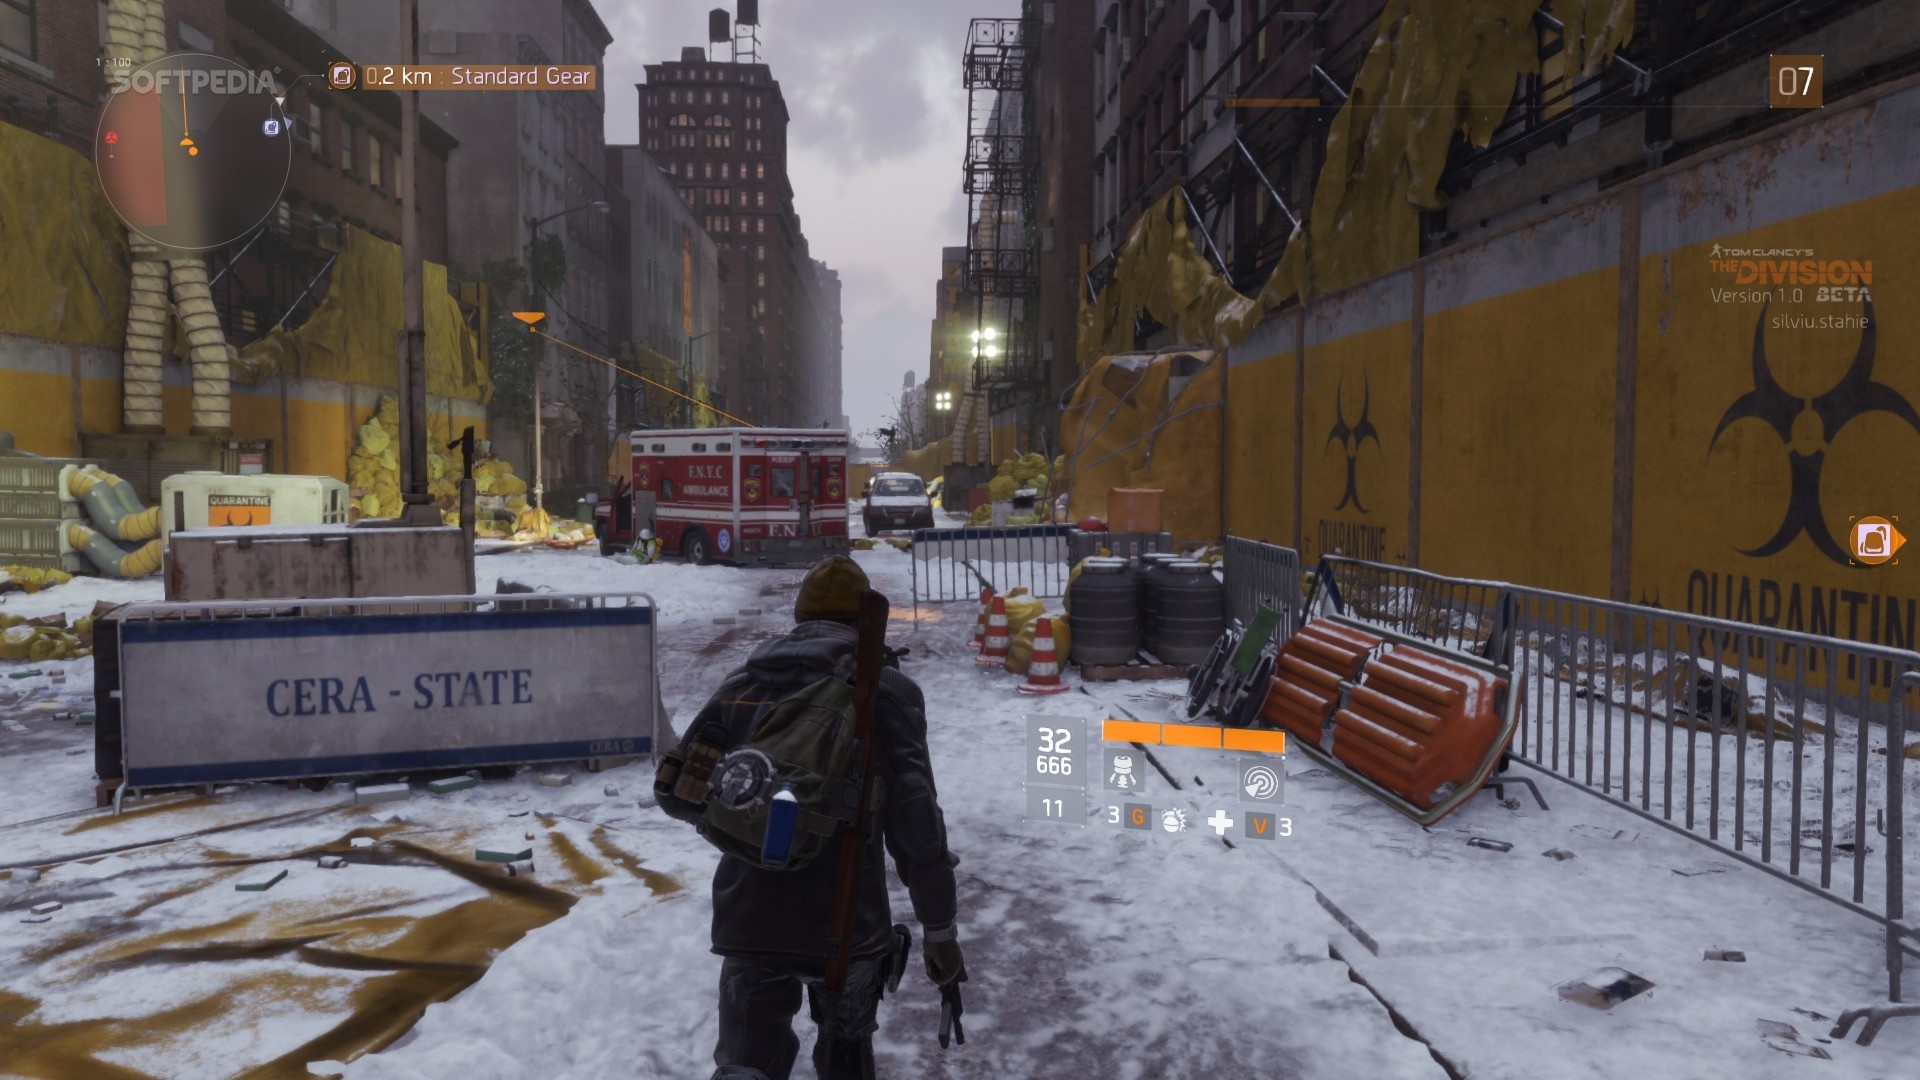 Division - Forget the Multiplayer, It's a Great Single-Player Game